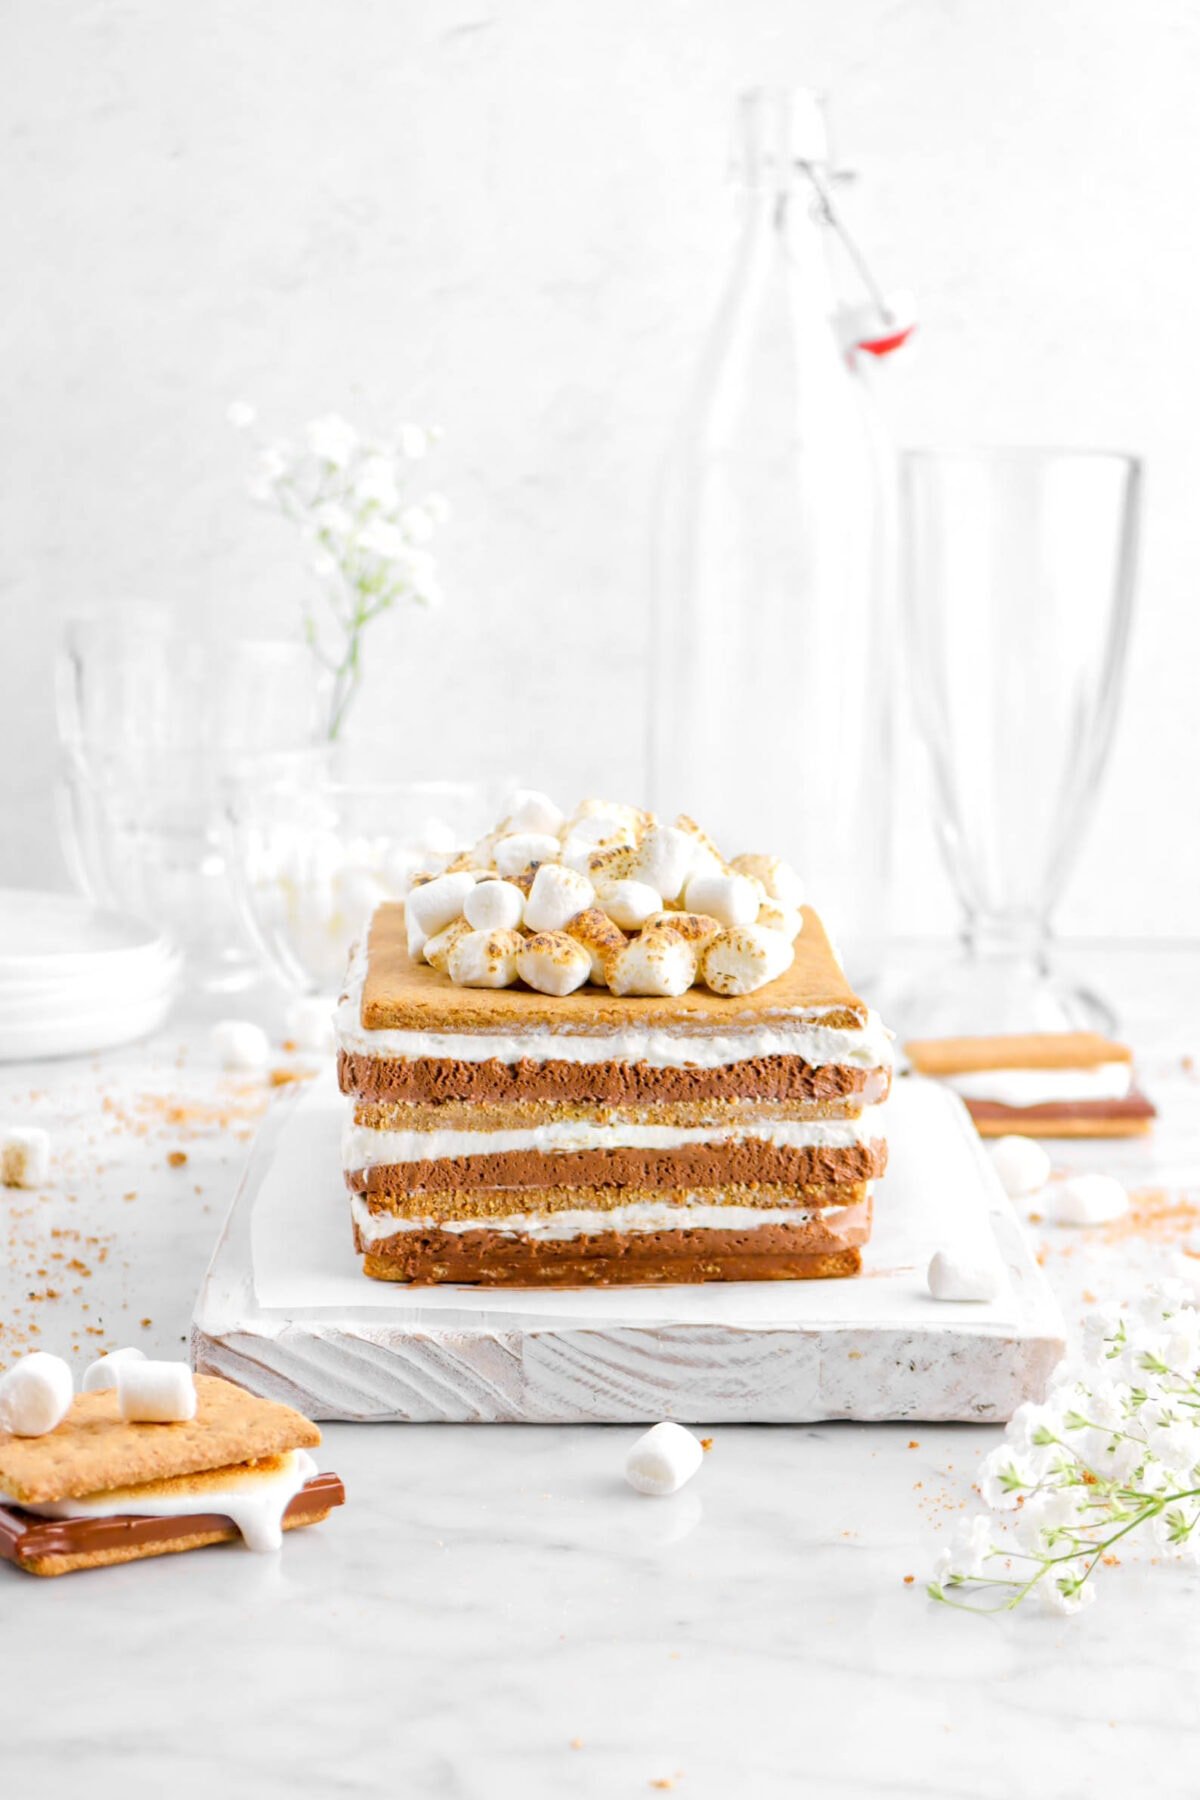 icebox cake with toasted marshmallows on top on wood board with flowers, two'smores, and graham cracker crumbs around with glass of mini marshmallows behind